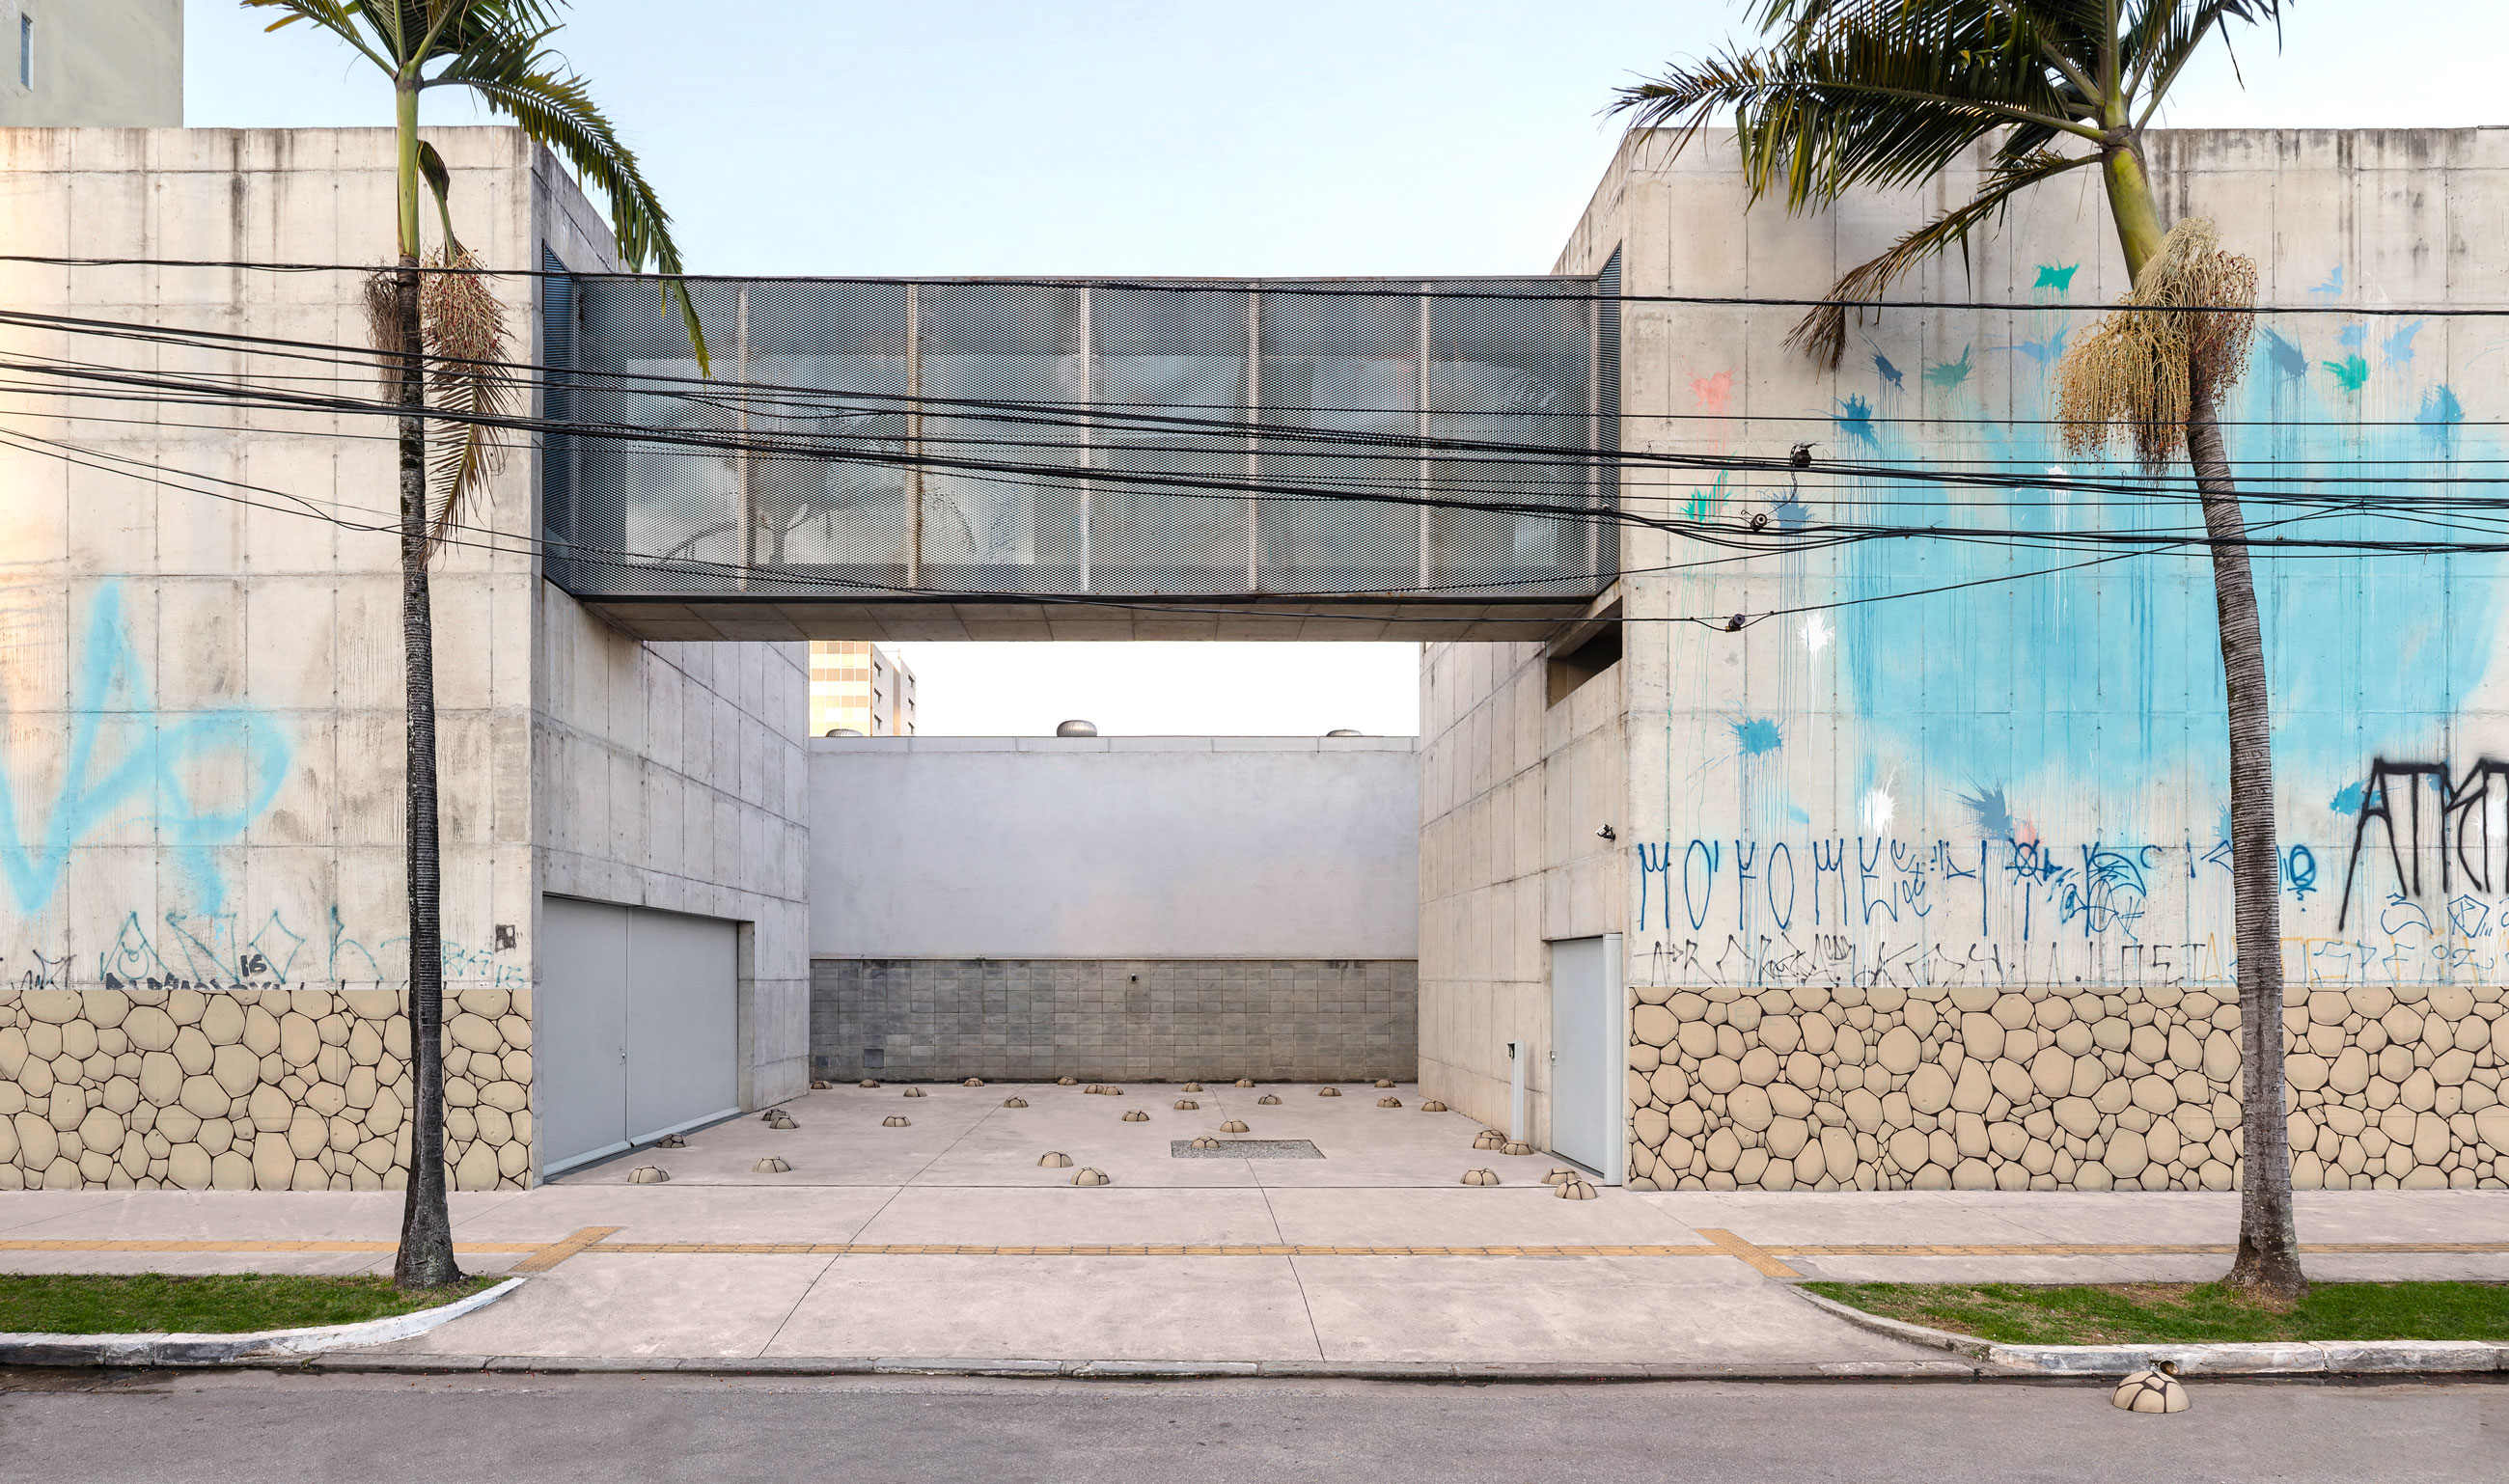 Site-specific Installation titled Errata by artist Ana Dias Batista, consisting of a graffitti with the pattern of a rock wall over the facade of Galeria Leme, curated by Bruno Alves de Almeida for the project SITU, São Paulo, Brazil.